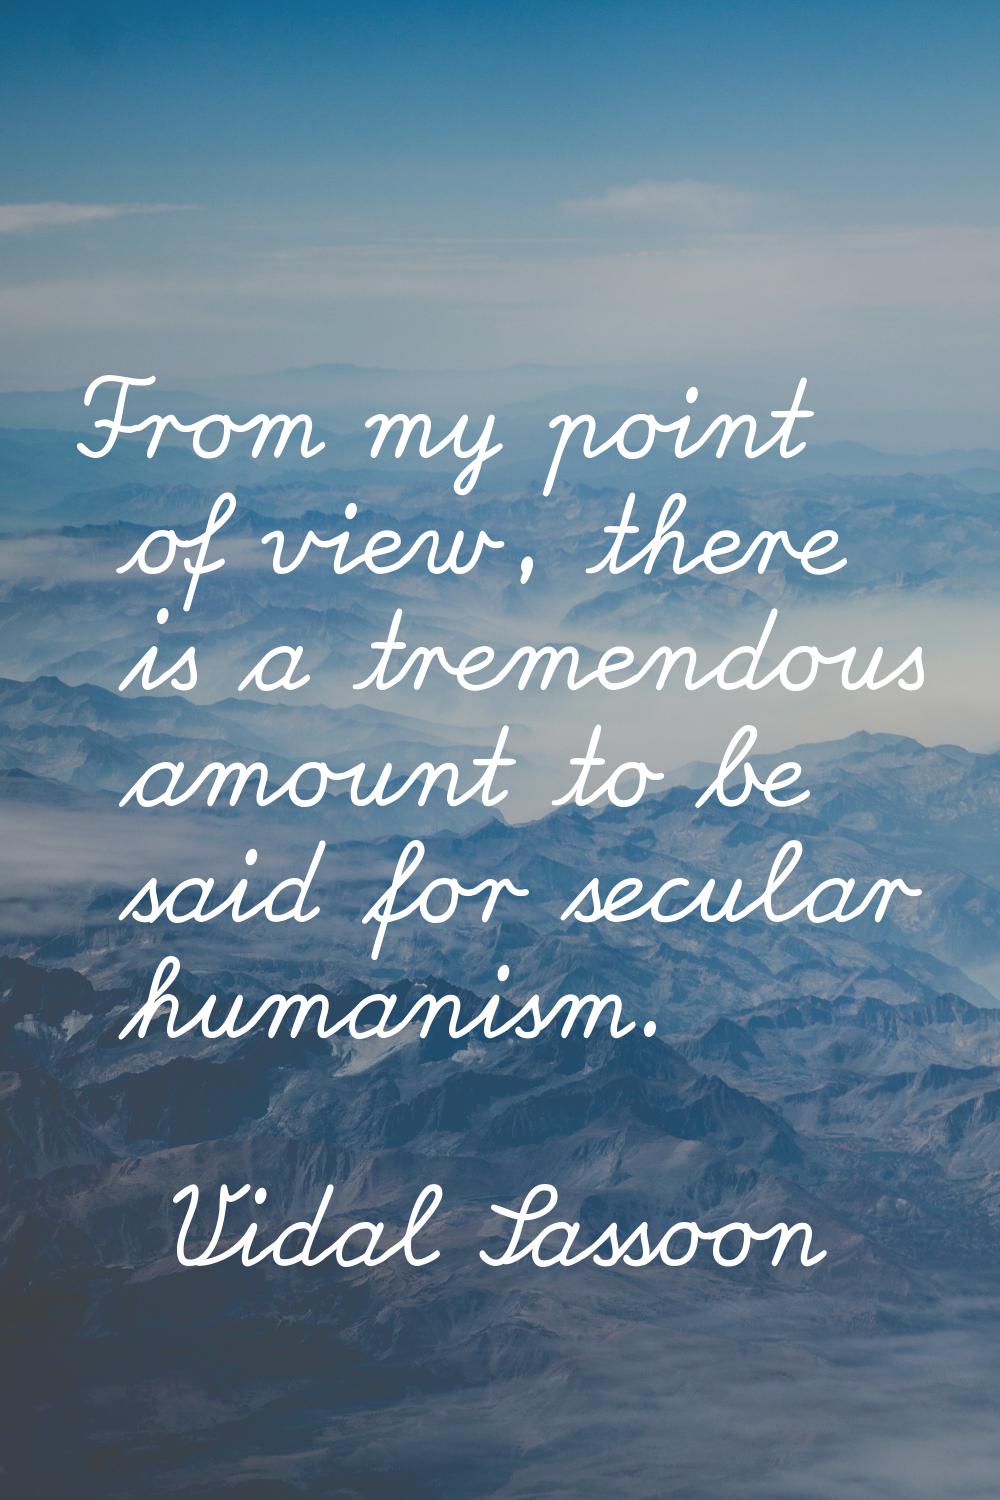 From my point of view, there is a tremendous amount to be said for secular humanism.